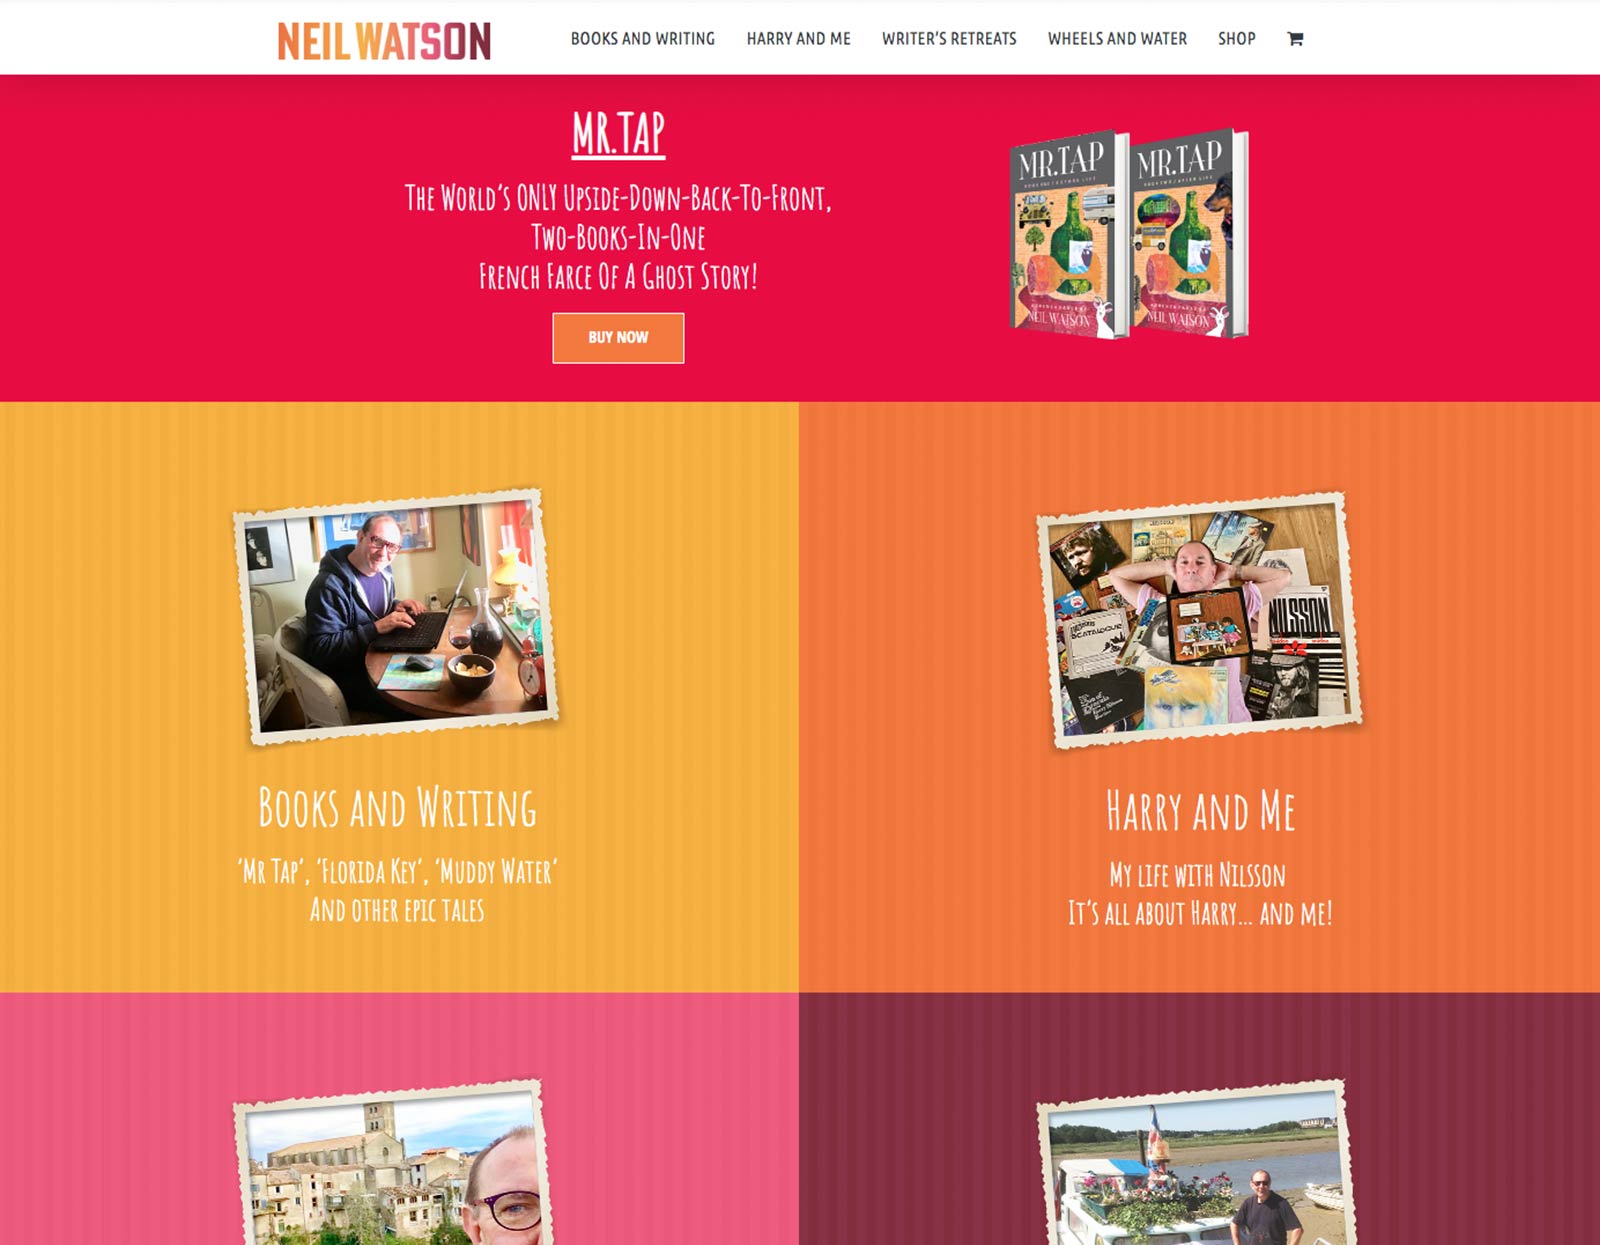 Image of web design for author Neil Watson, showing the website home page.